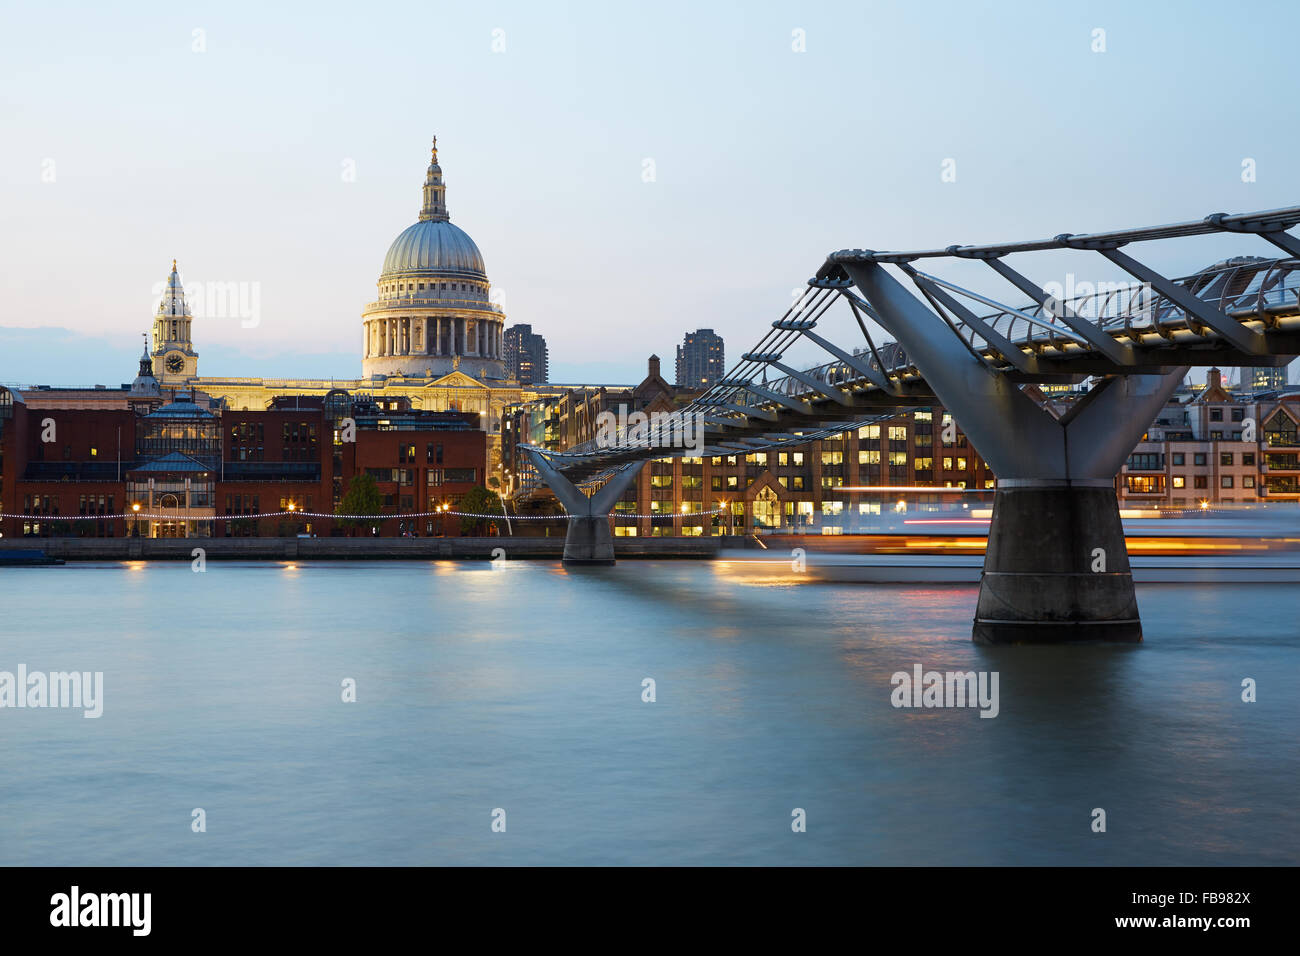 St Paul's cathedral and Millennium bridge in London in a clear evening, boat passing Stock Photo